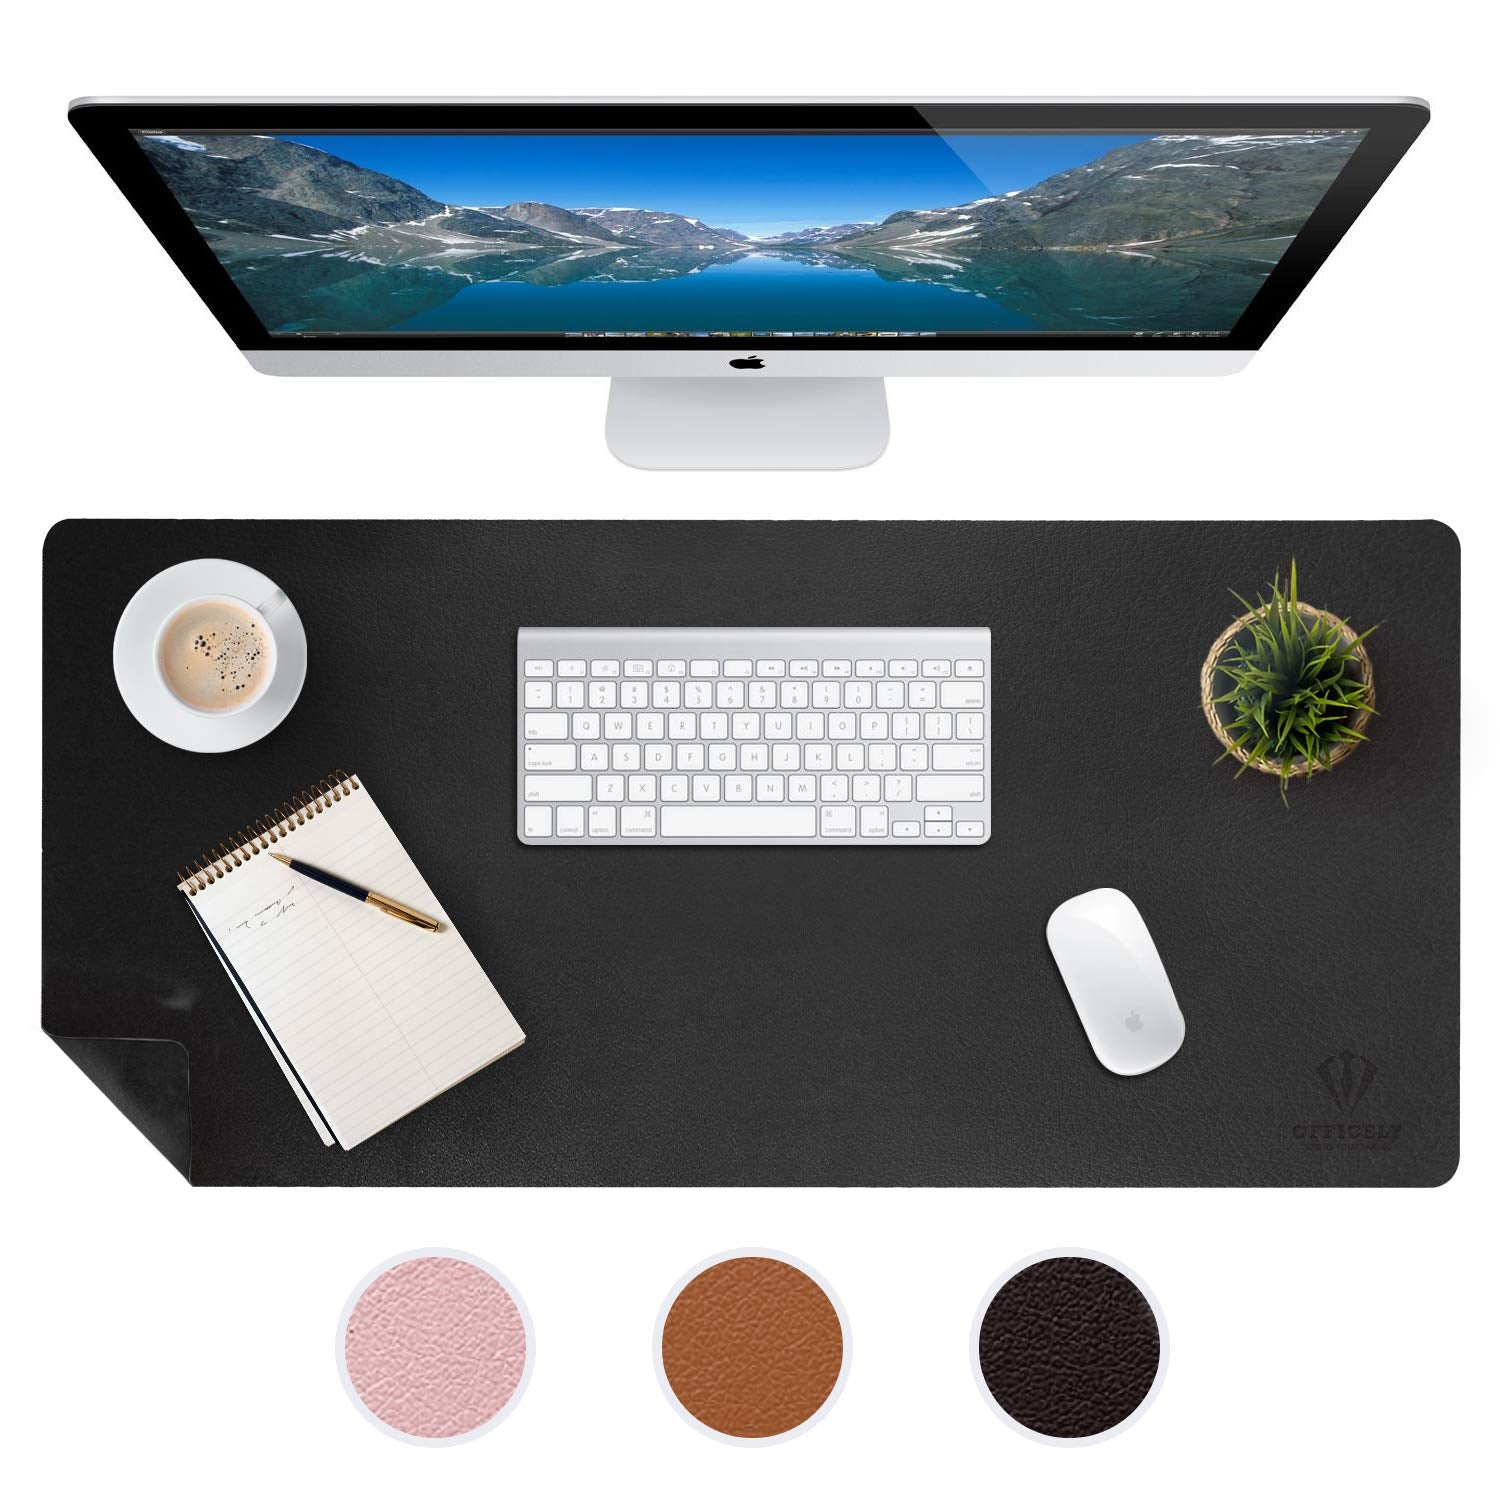 Officely Large Desk Mat for Keyboard and Mouse Pad, Anti-Skid Backing with Heat Resistant and Waterproof Surface, Responsive Desktop for Gaming, Writing, or Home Office Work  - Like New